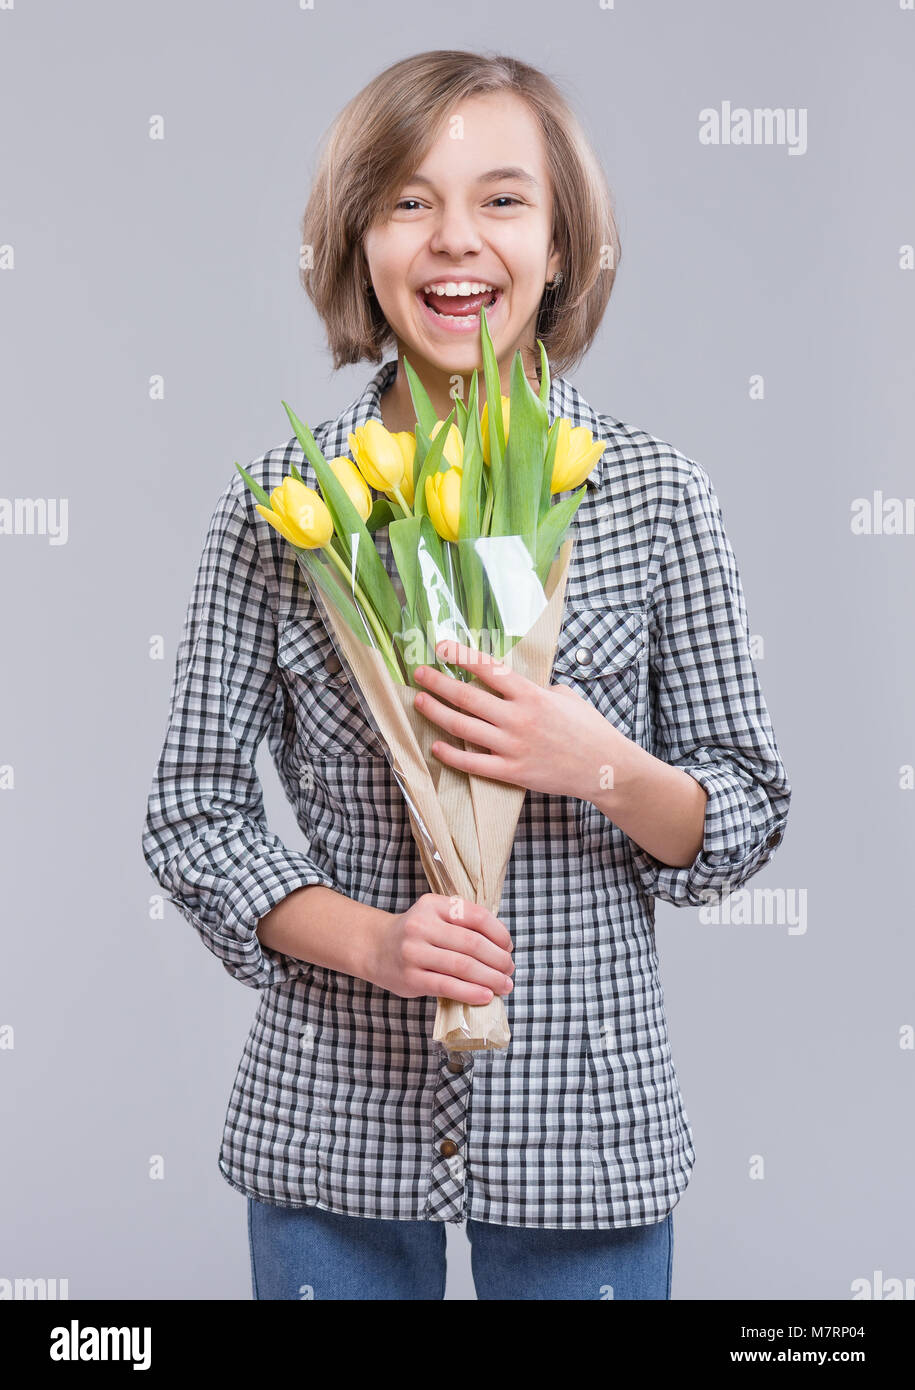 Girl with flowers Stock Photo